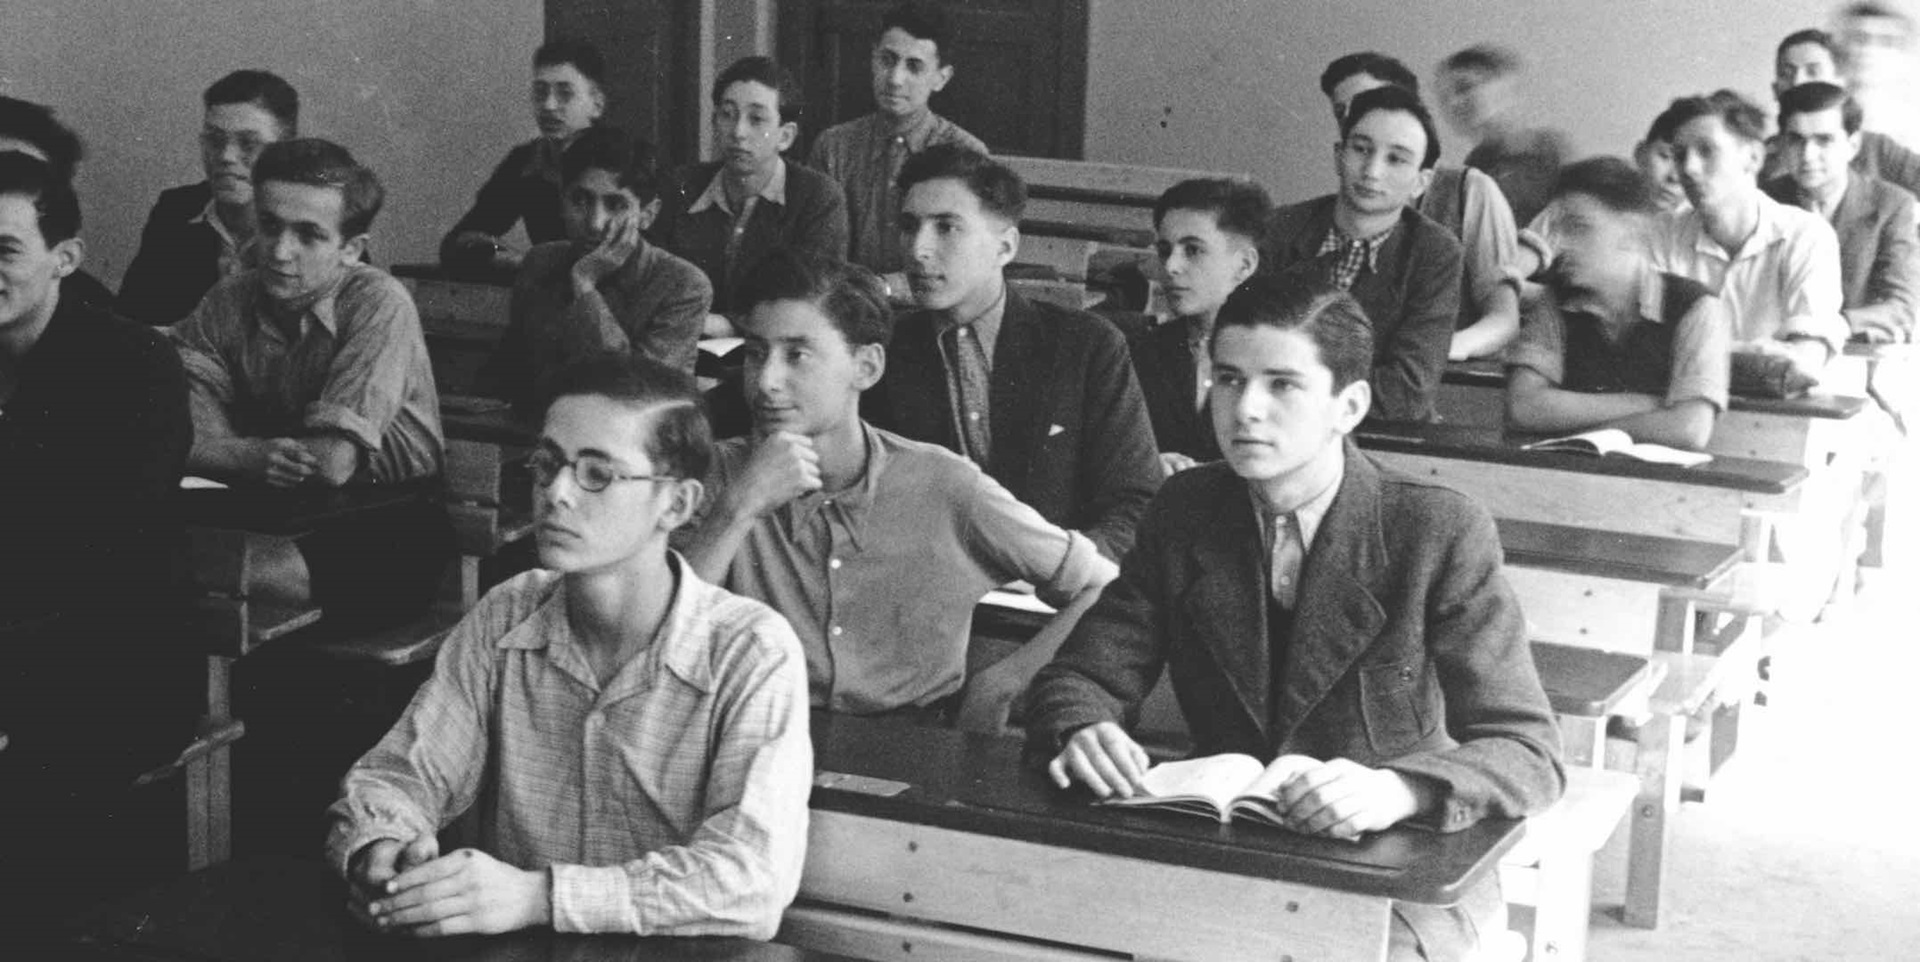 Henry Lippmann (centre, with hand on chin) during a lesson at the Jewish ORT school in Berlin, Germany, c 1939. ANMM Collection ANMS0219[007], gift from Henry Lippmann